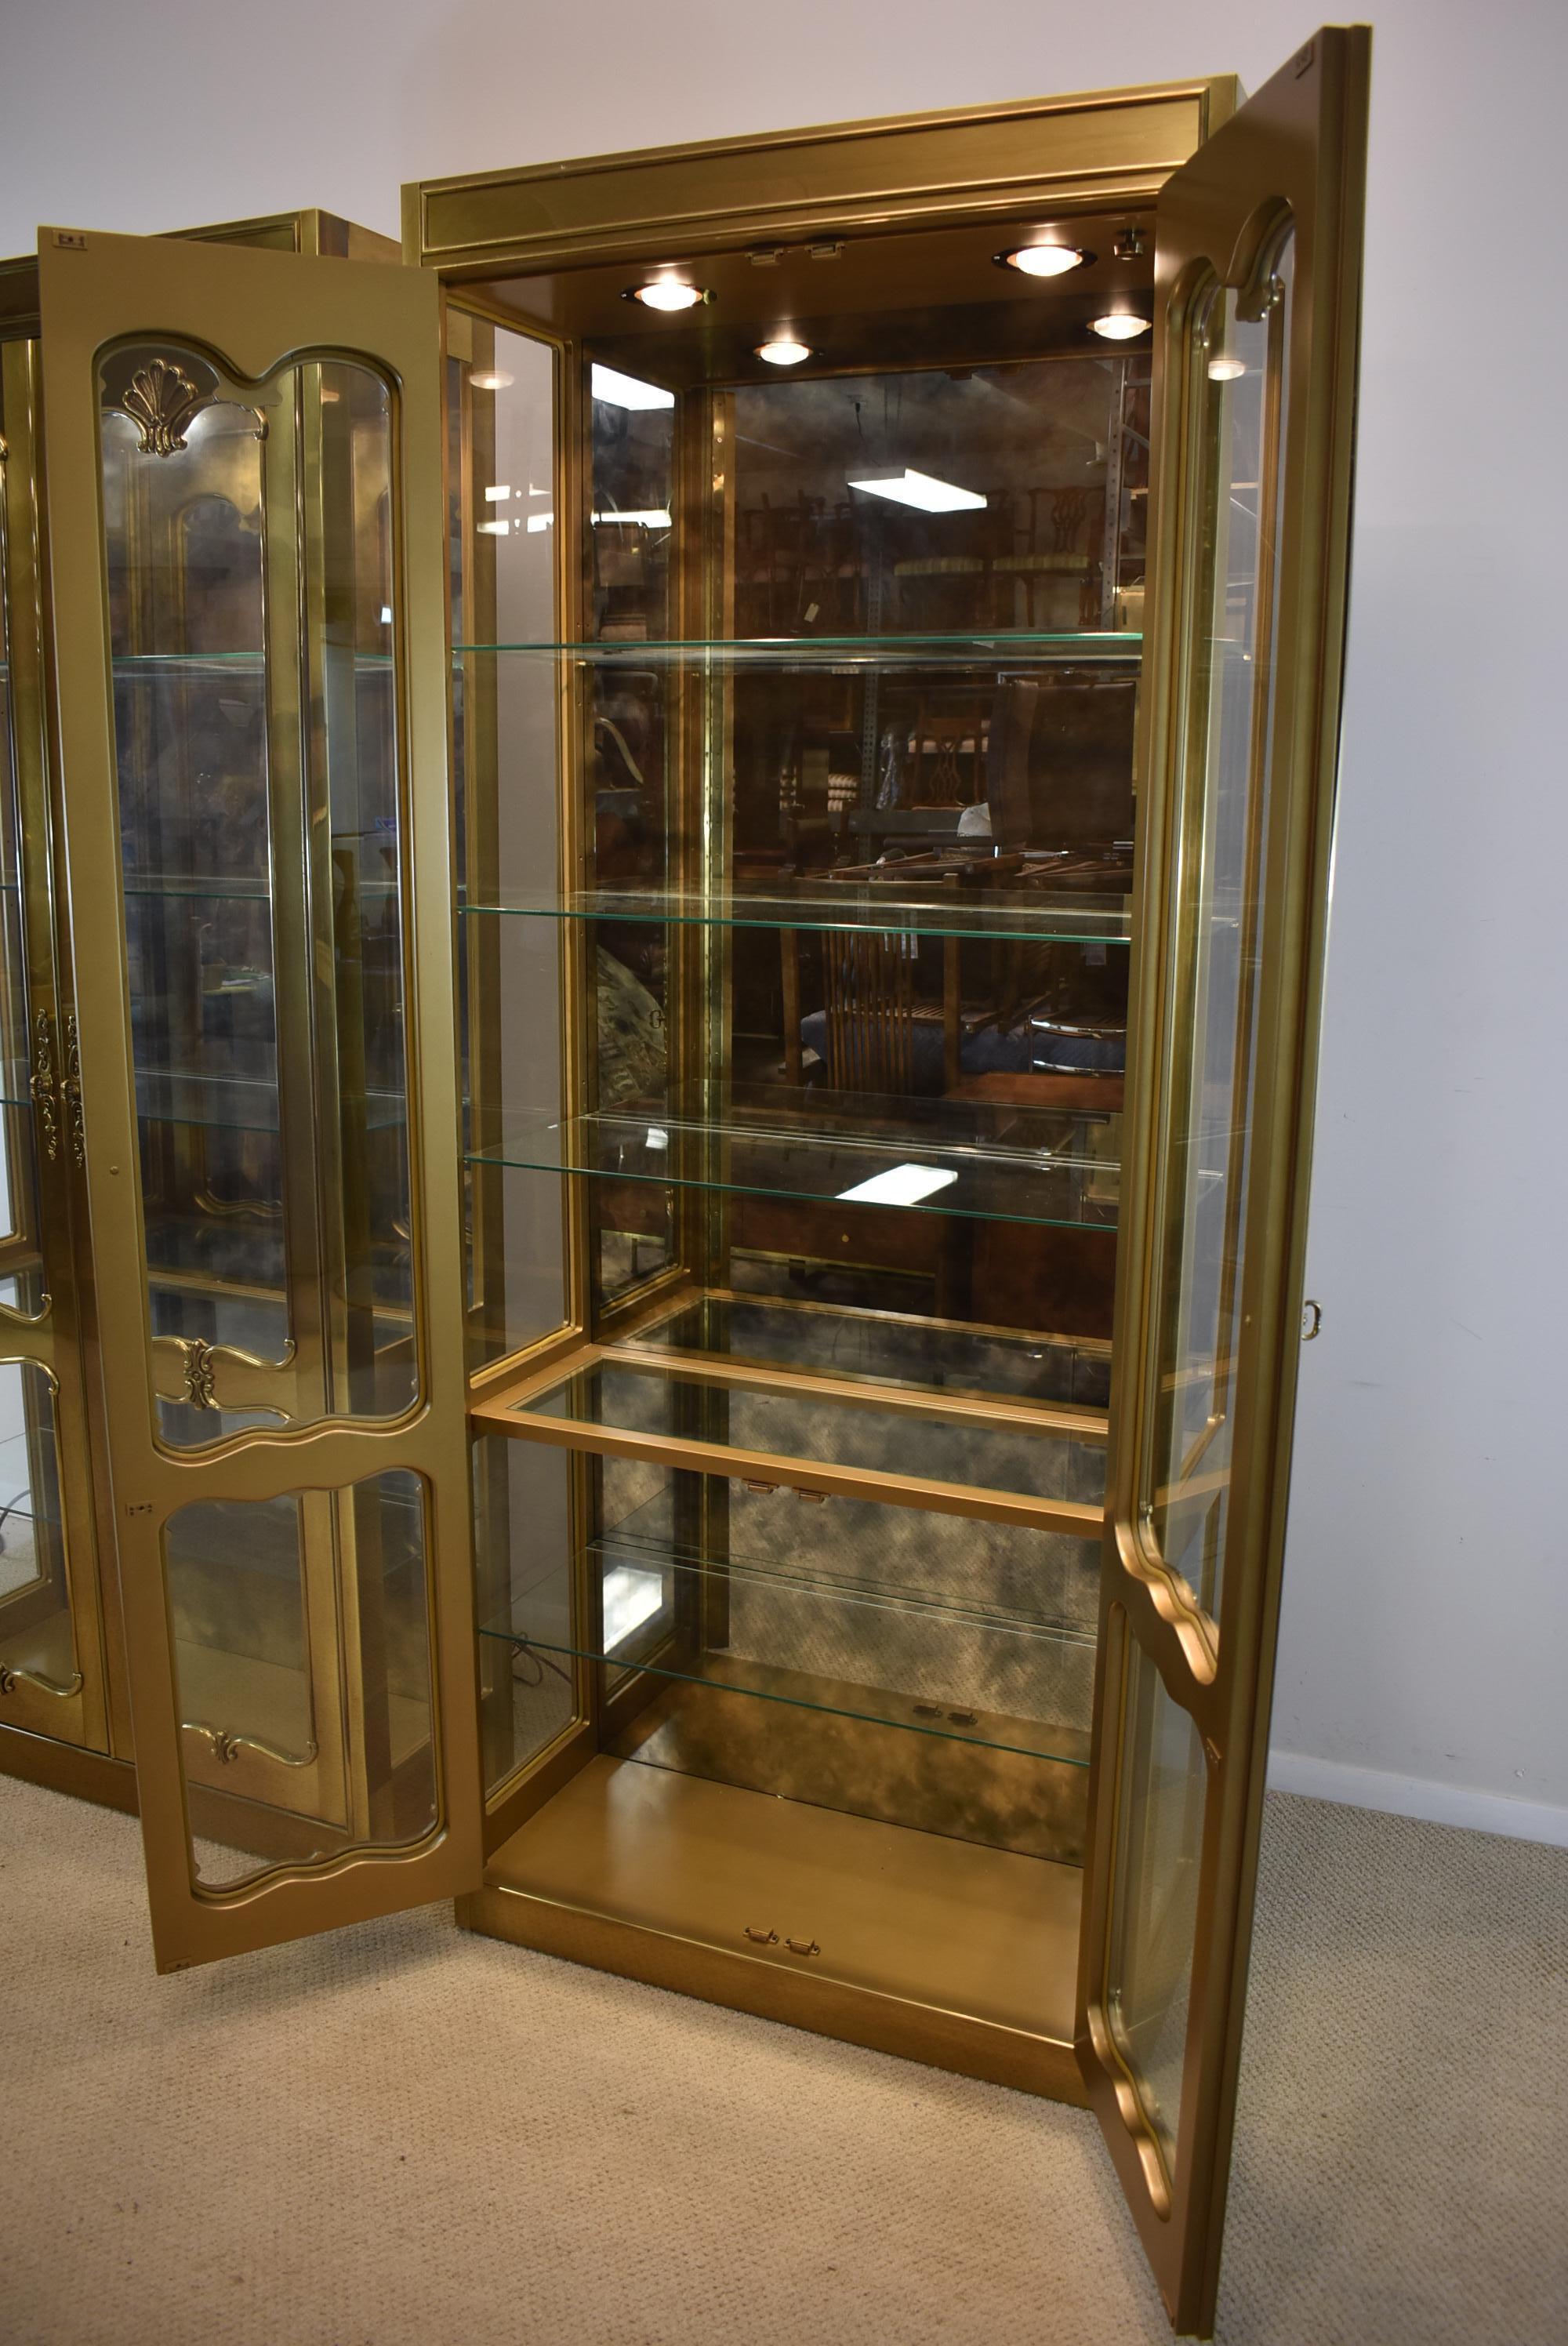 Joinery Pair of Brass Mastercraft Curio Display Cabinets Lighted Interior